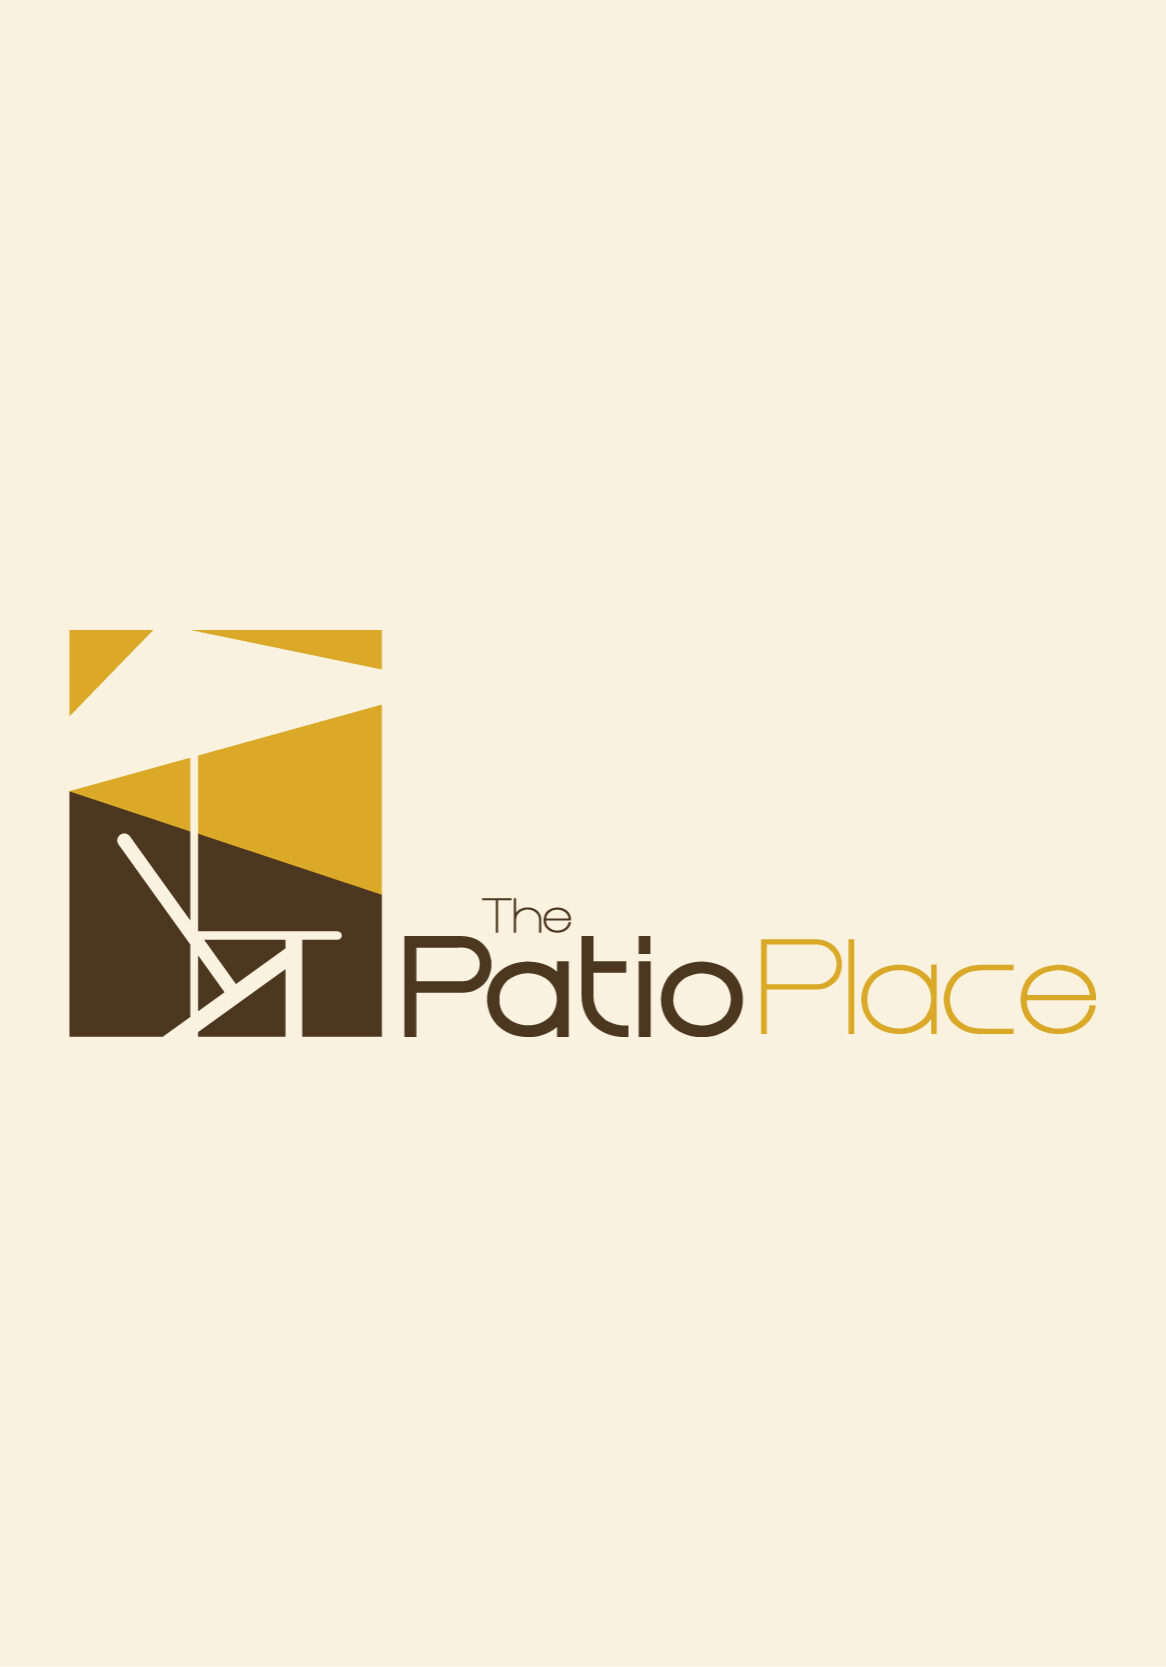 The Patio Place | SnapMe Creative